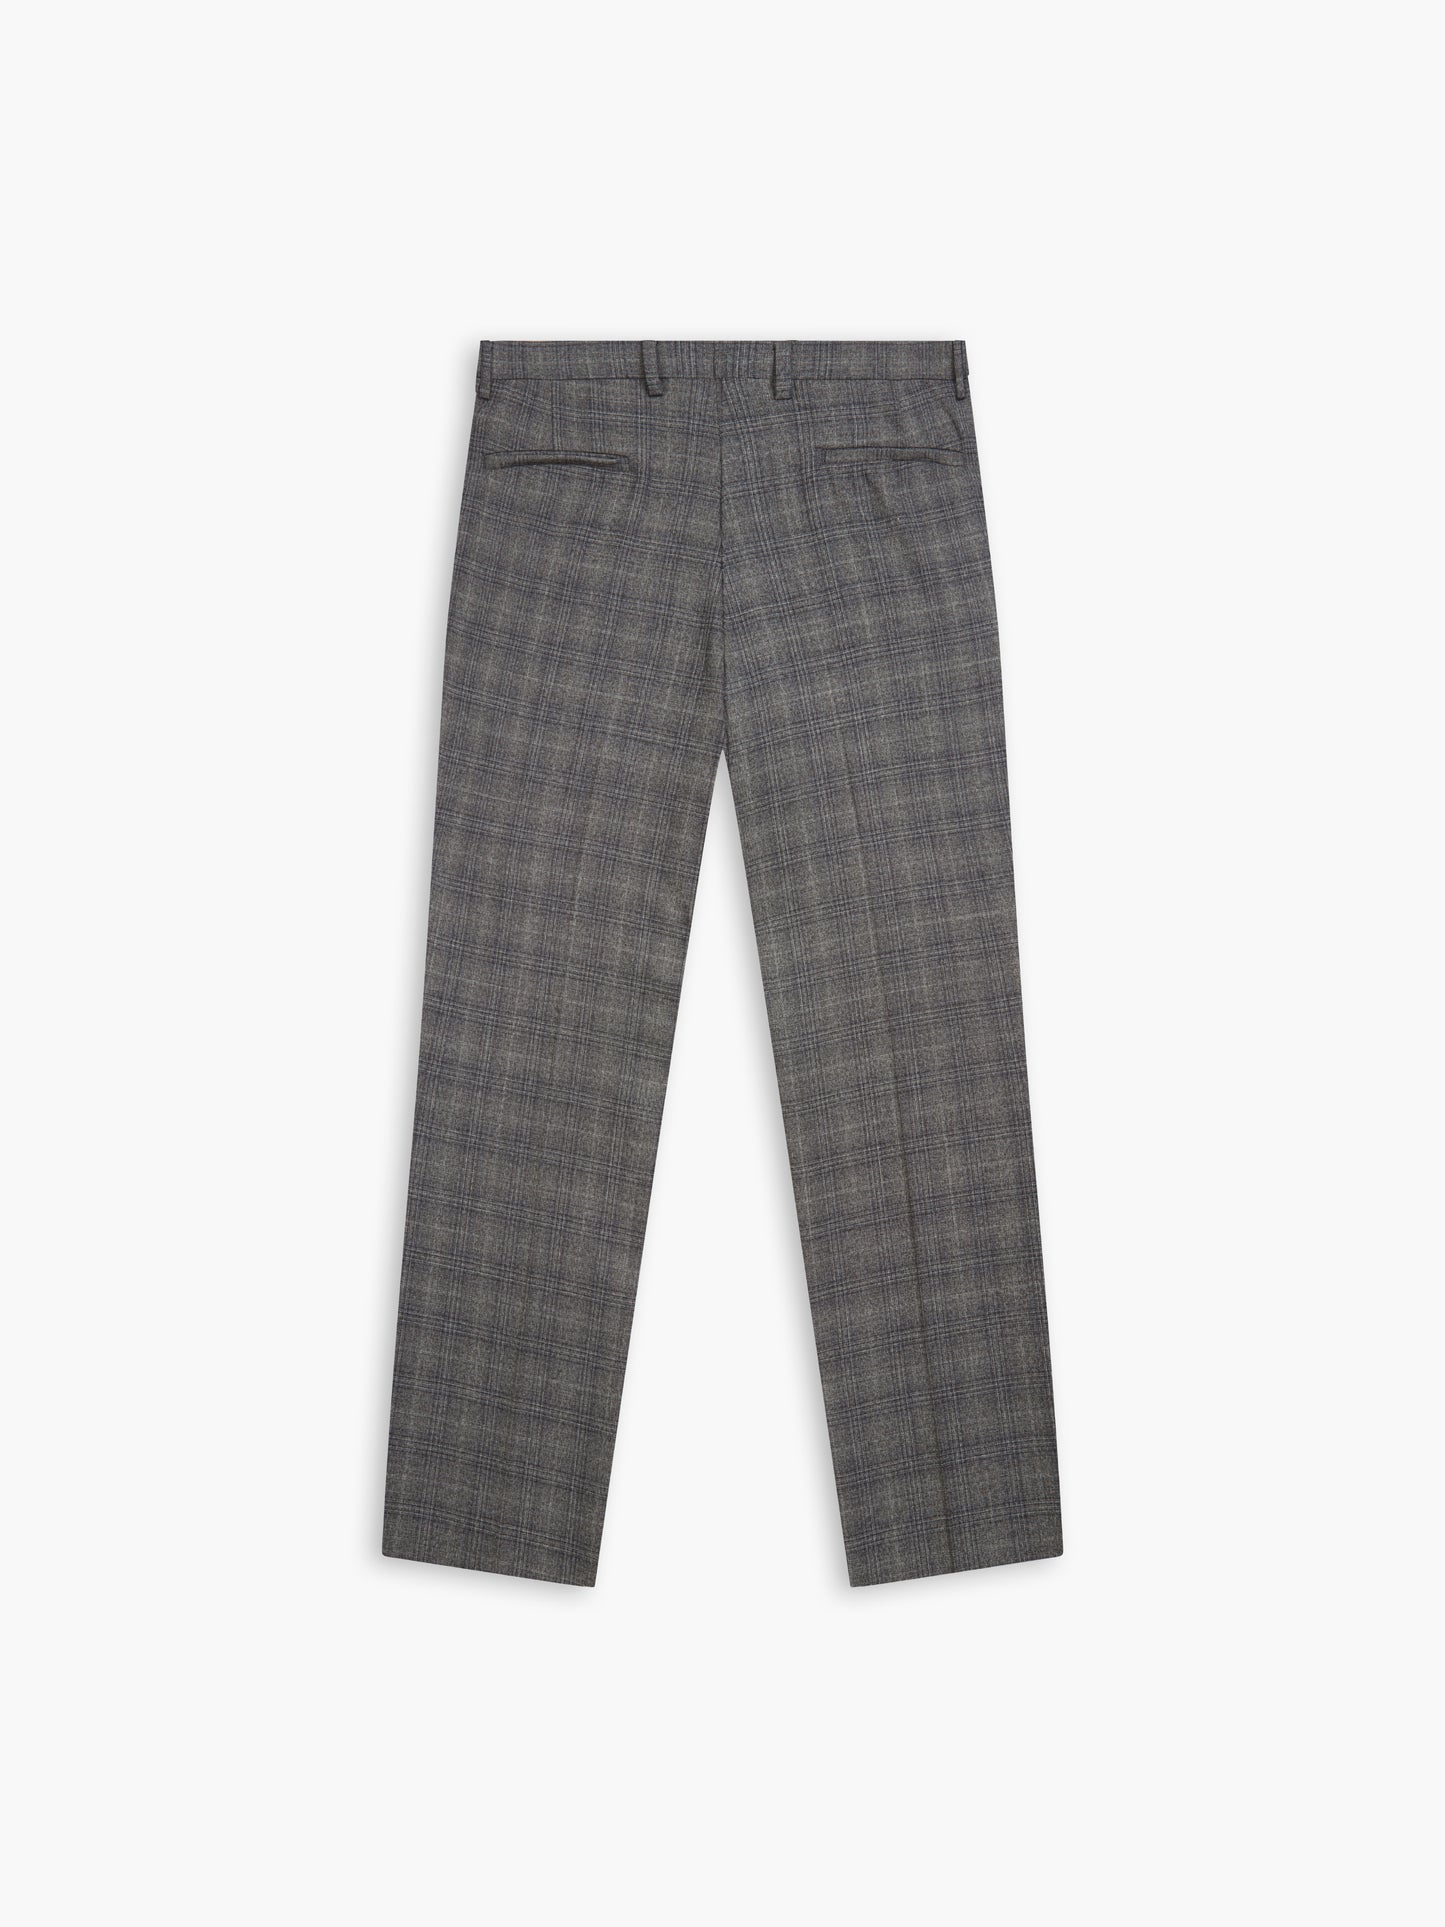 Crossley Infinity Slim Fit Grey Check Trousers